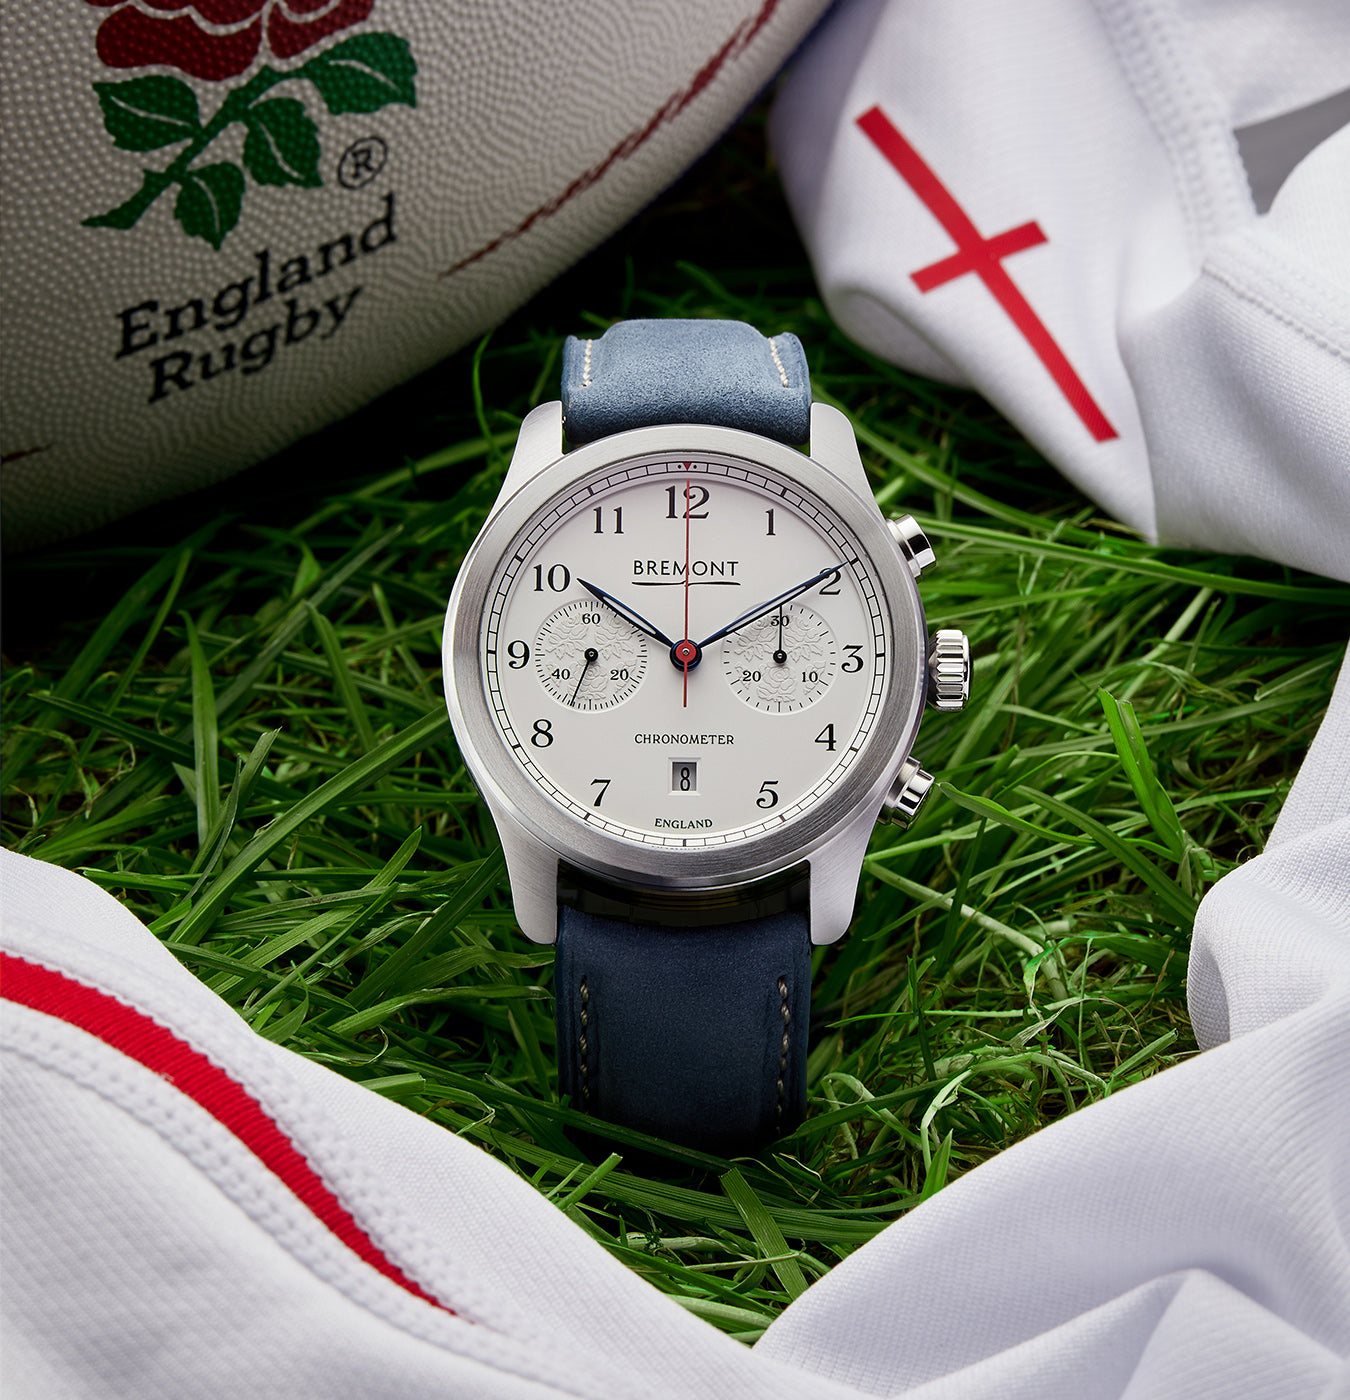 The Bremont Rose